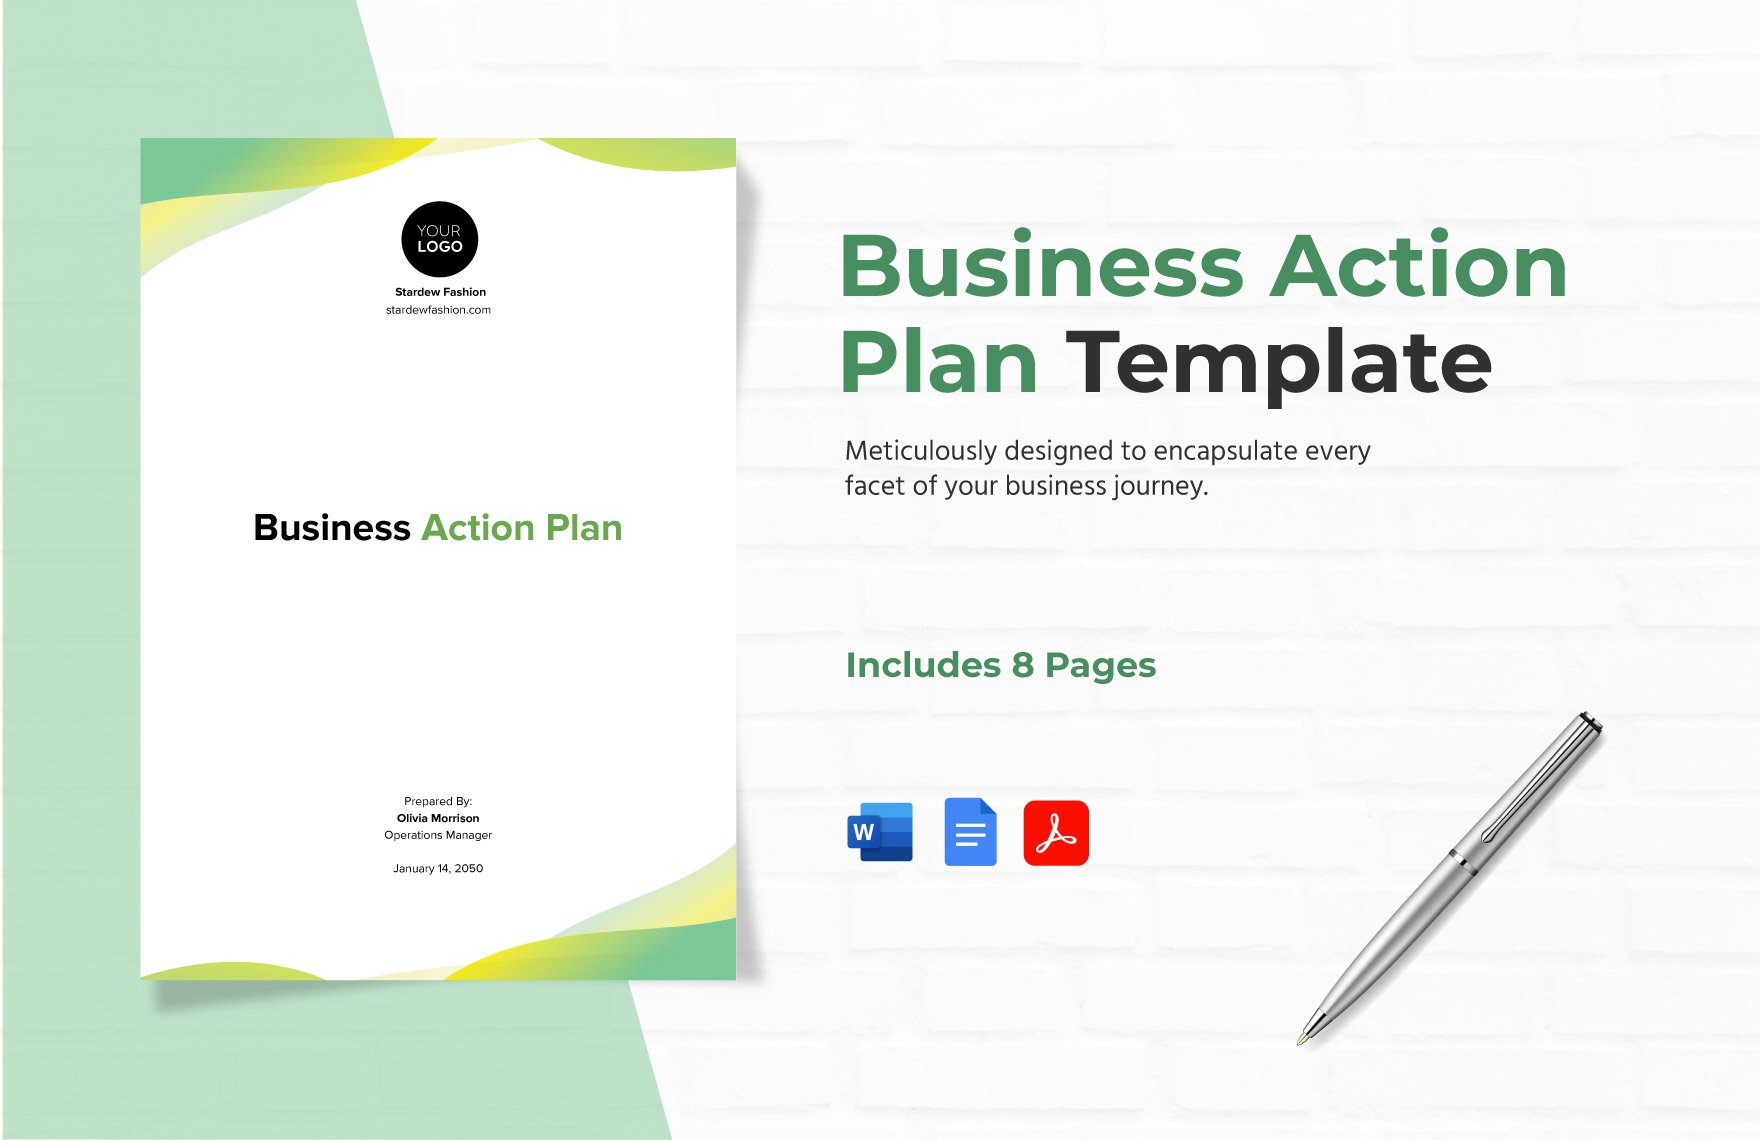 Business Action Plan Template in Word, Google Docs, PDF, Apple Pages